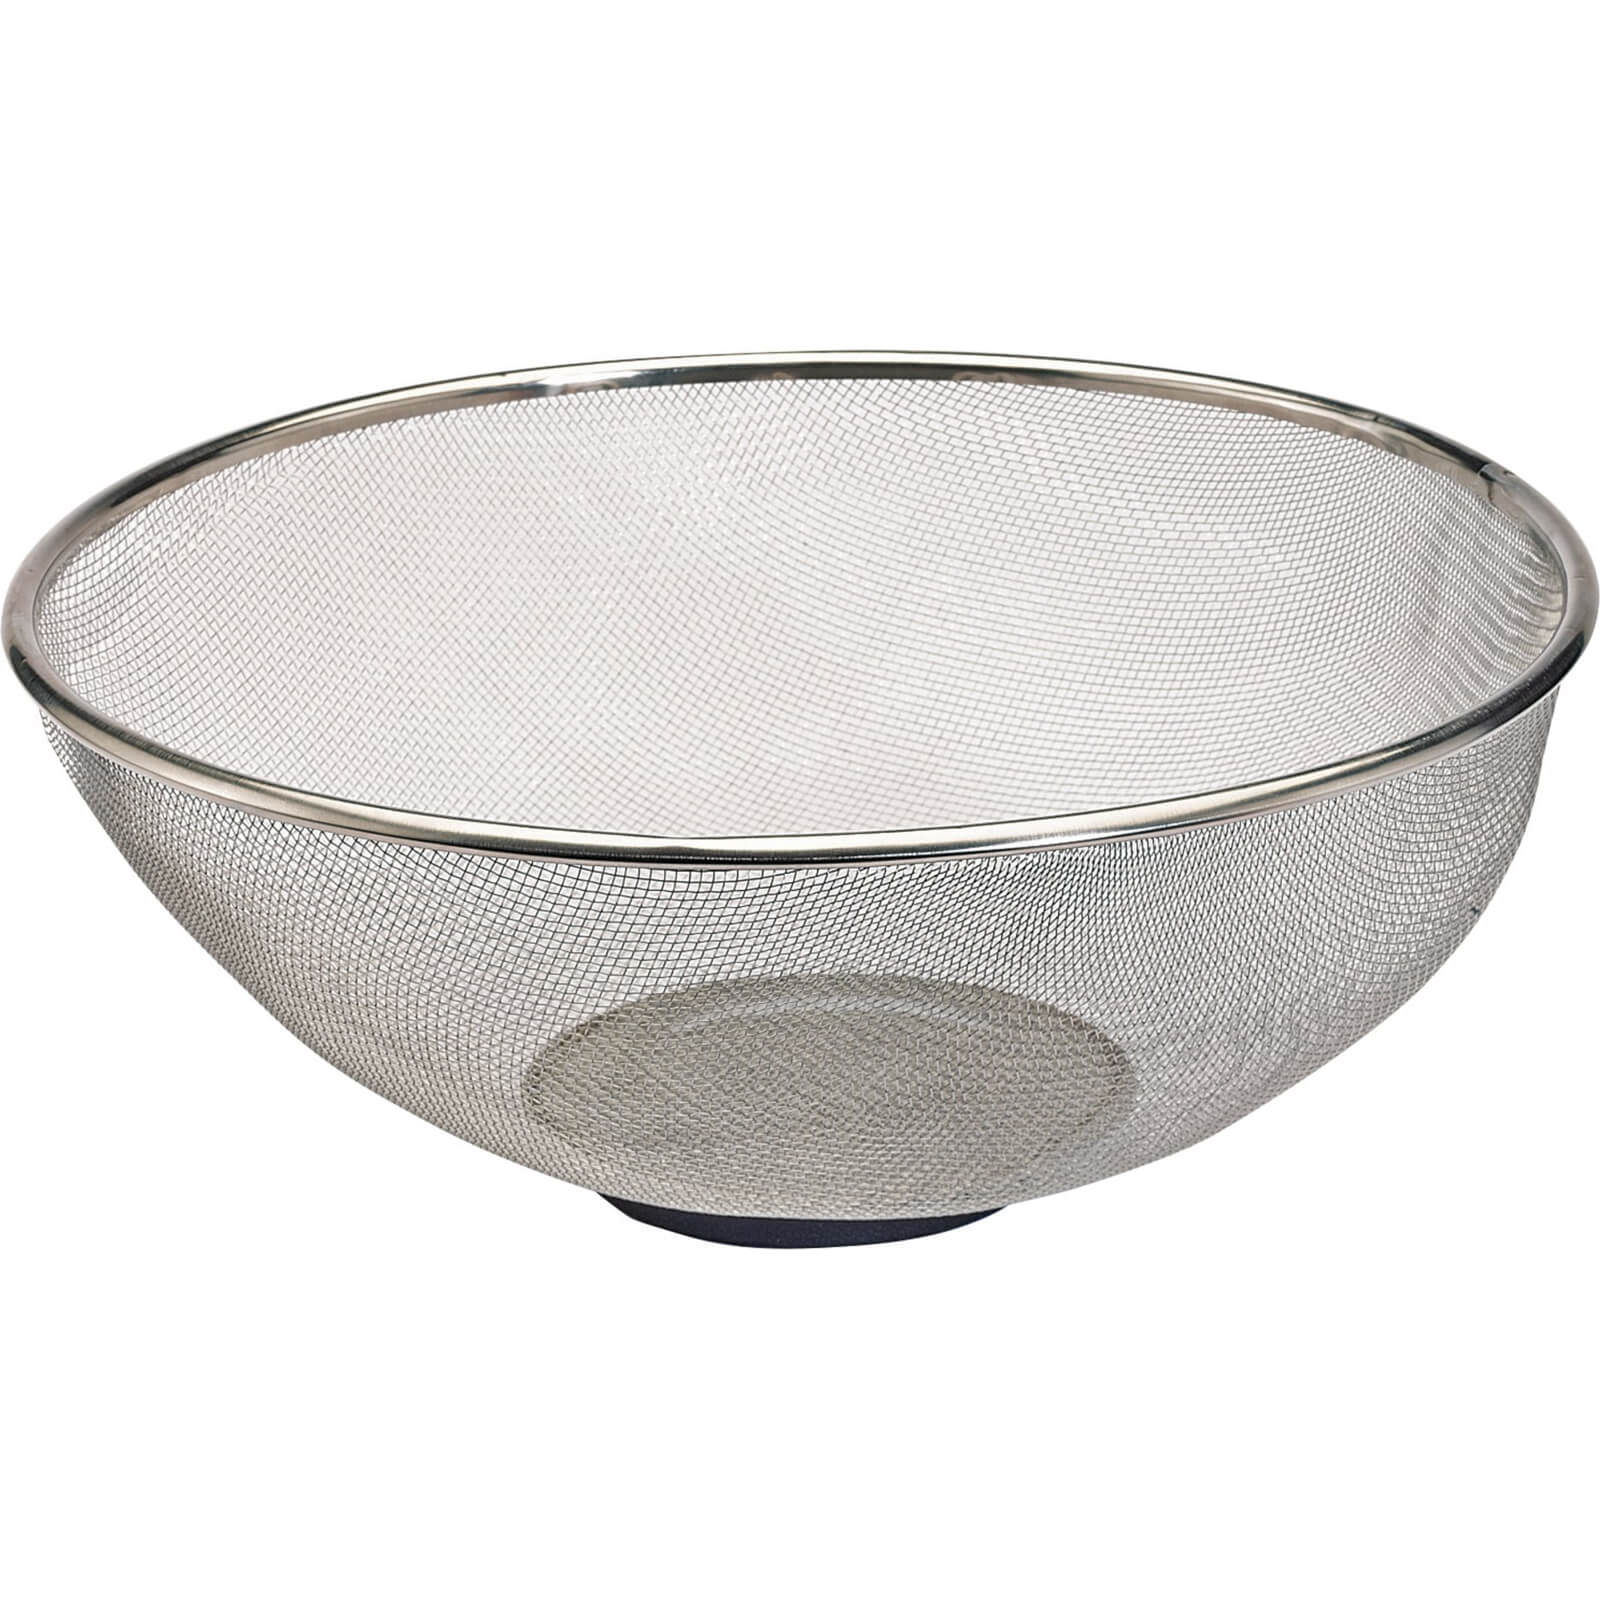 Photo of Draper Magnetic Stainless Steel Mesh Parts Bowl